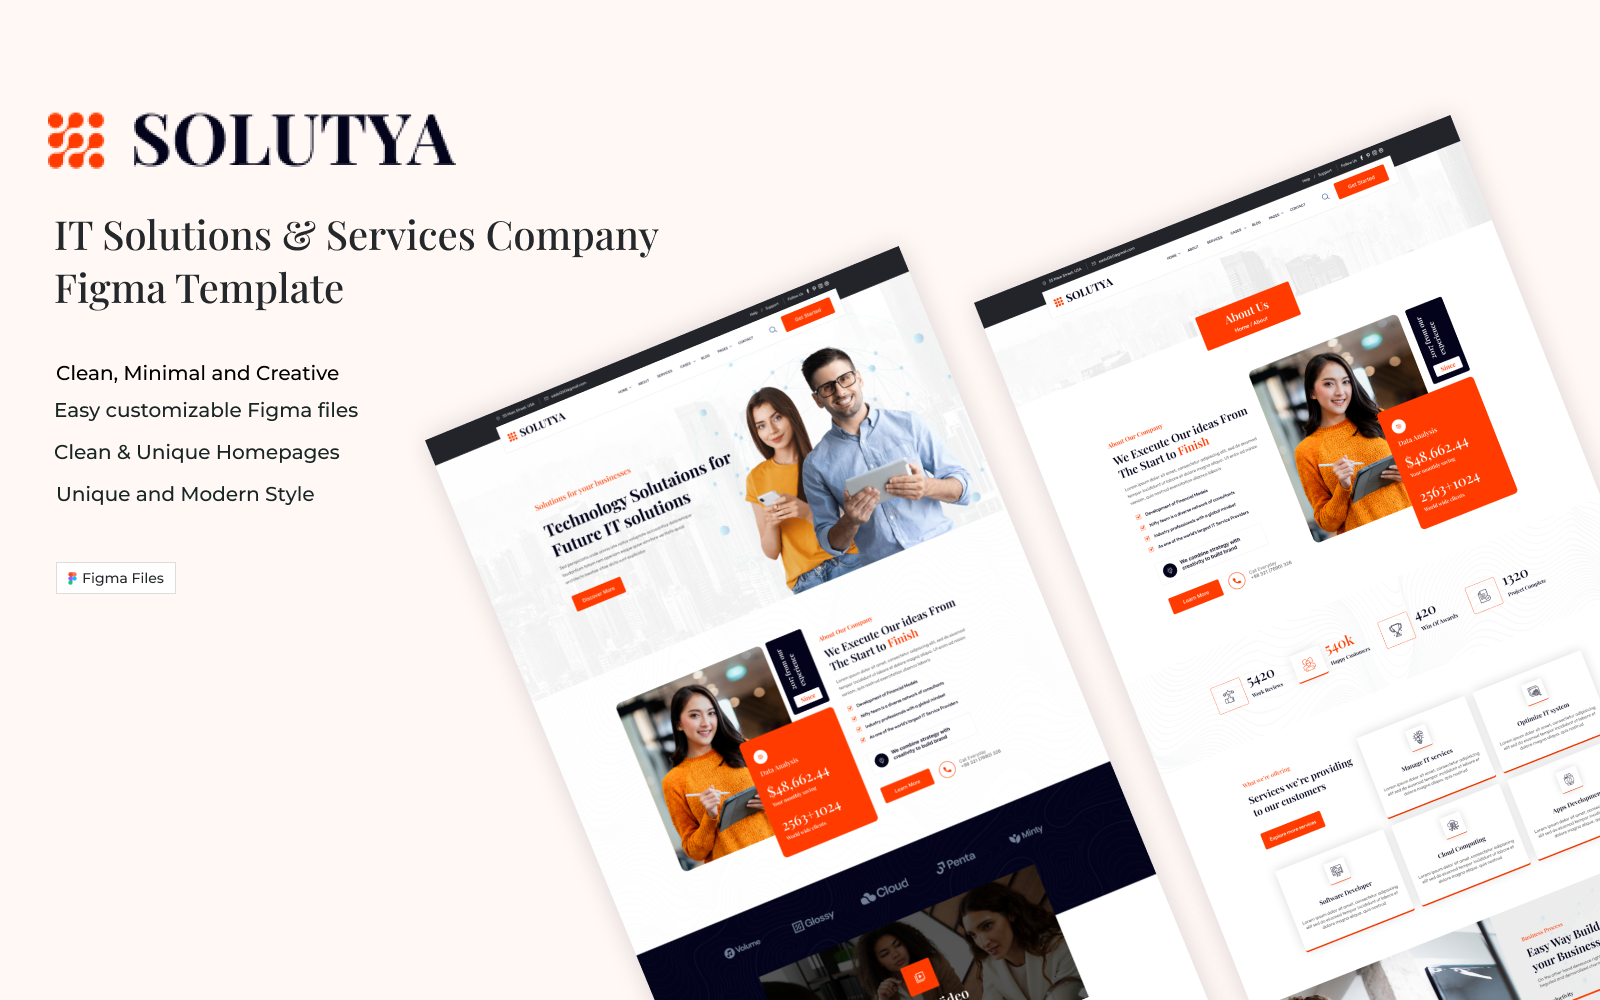 Solutya_IT Solutions & Services Company Figma Template